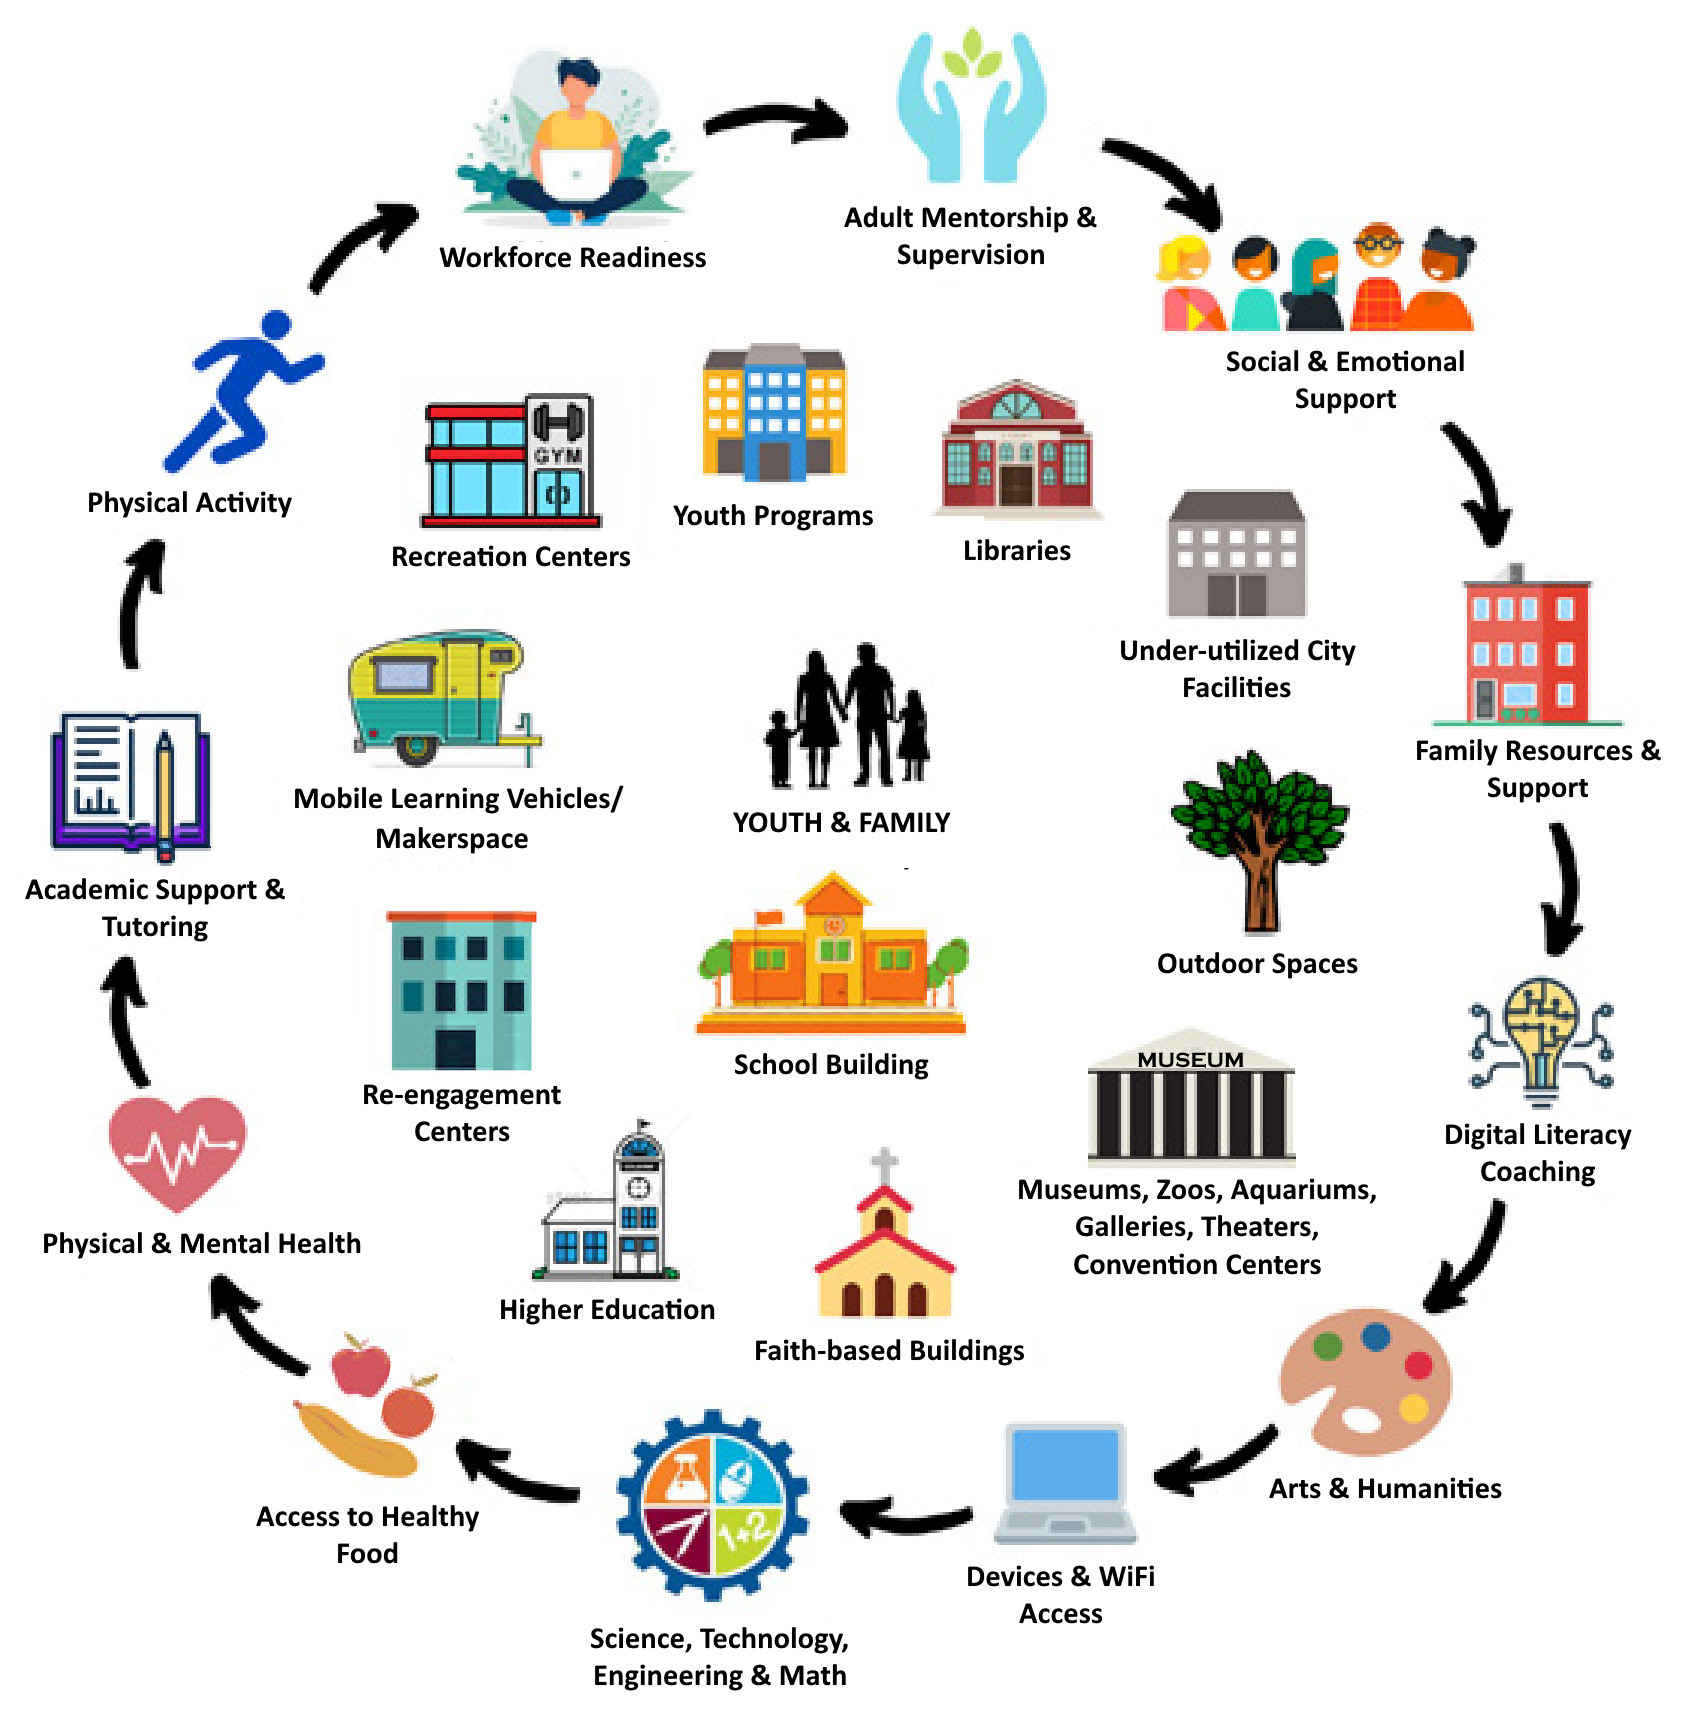 Community learning hub - Youth & Family and School Building are at the center of two rings of resources.